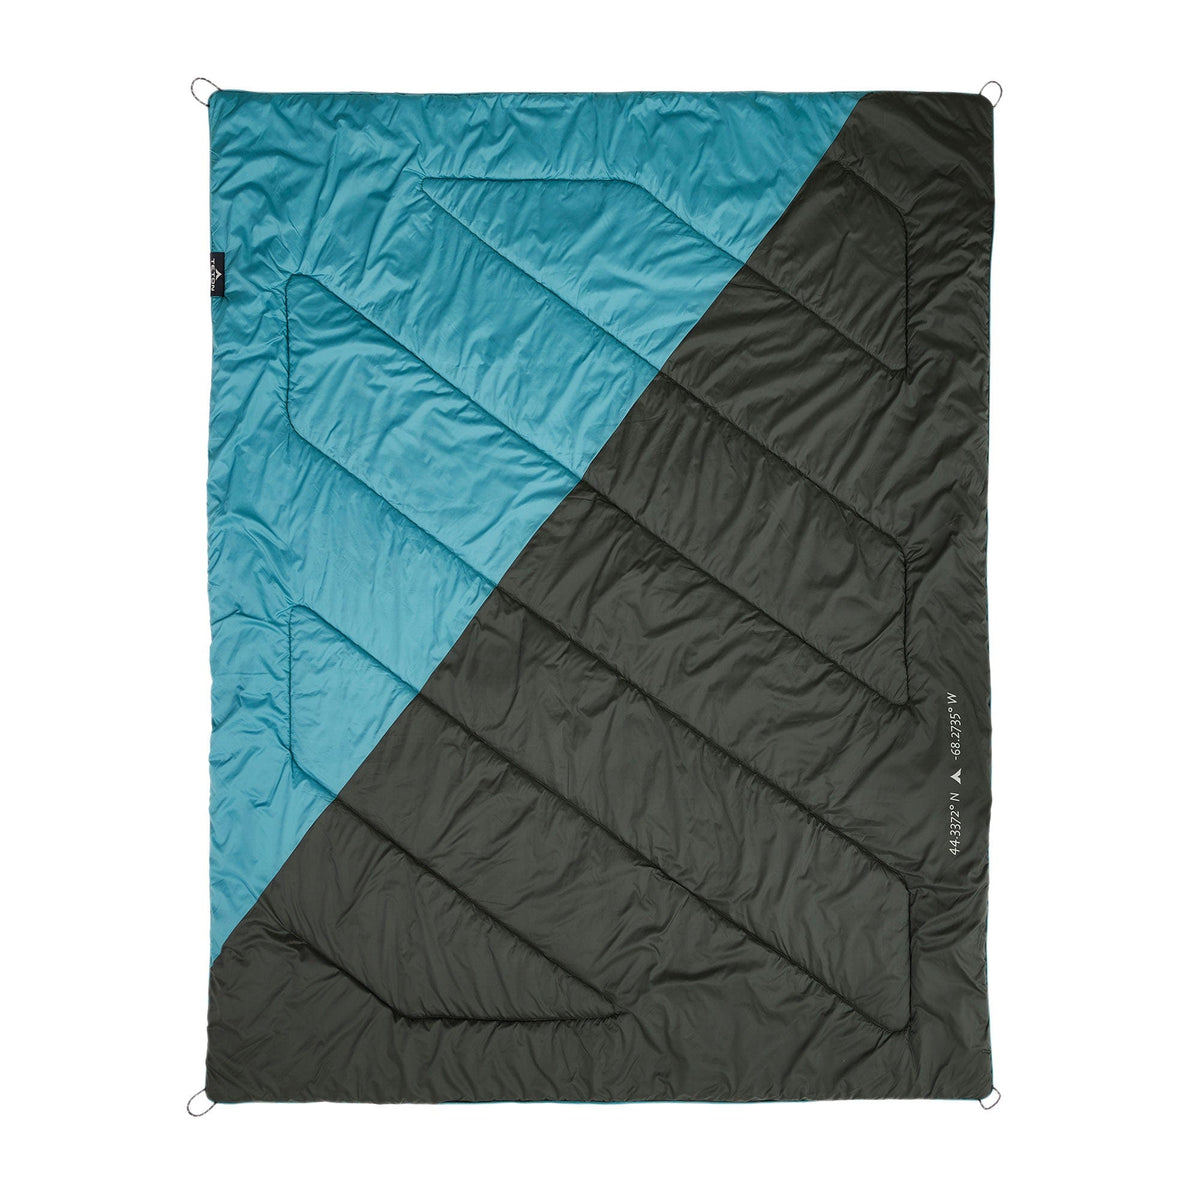 TETON Sports Acadia Outdoor Blanket - OR Show '24 Teal & Slate 70001-OR